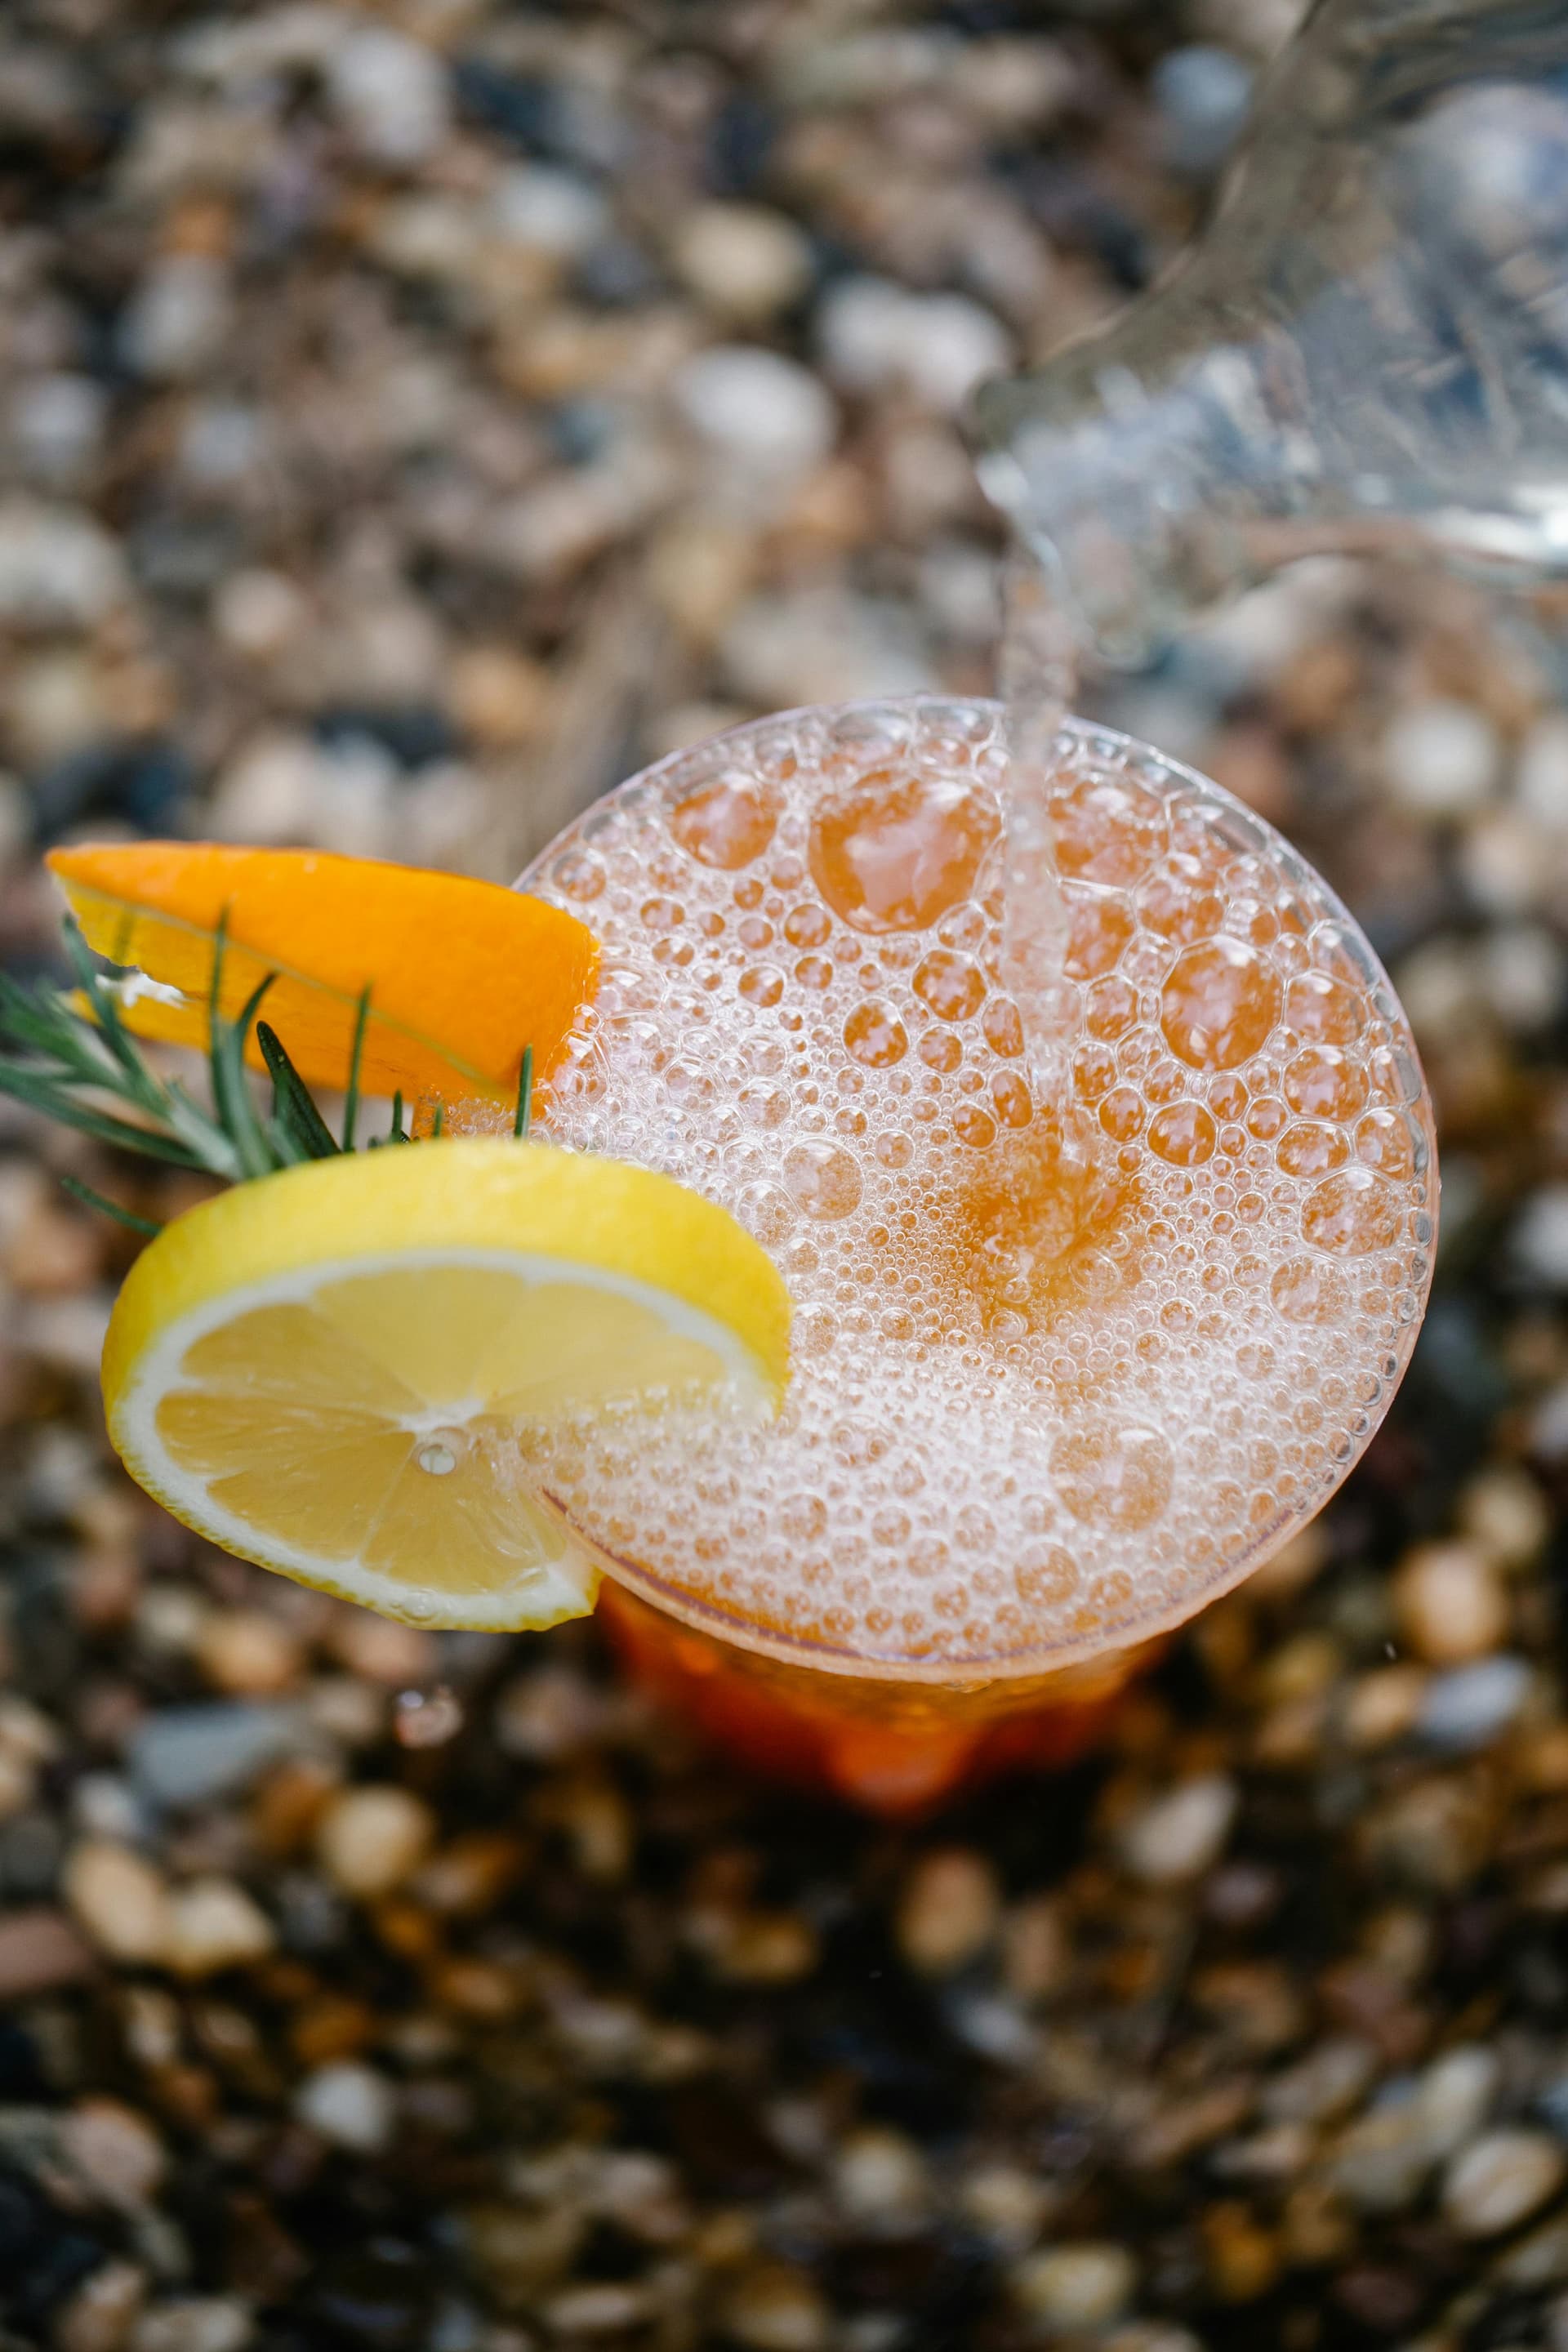 Five Refreshing Lemonade Cocktails That Complement Summer Foods (And TBH Versatile All Year Round)